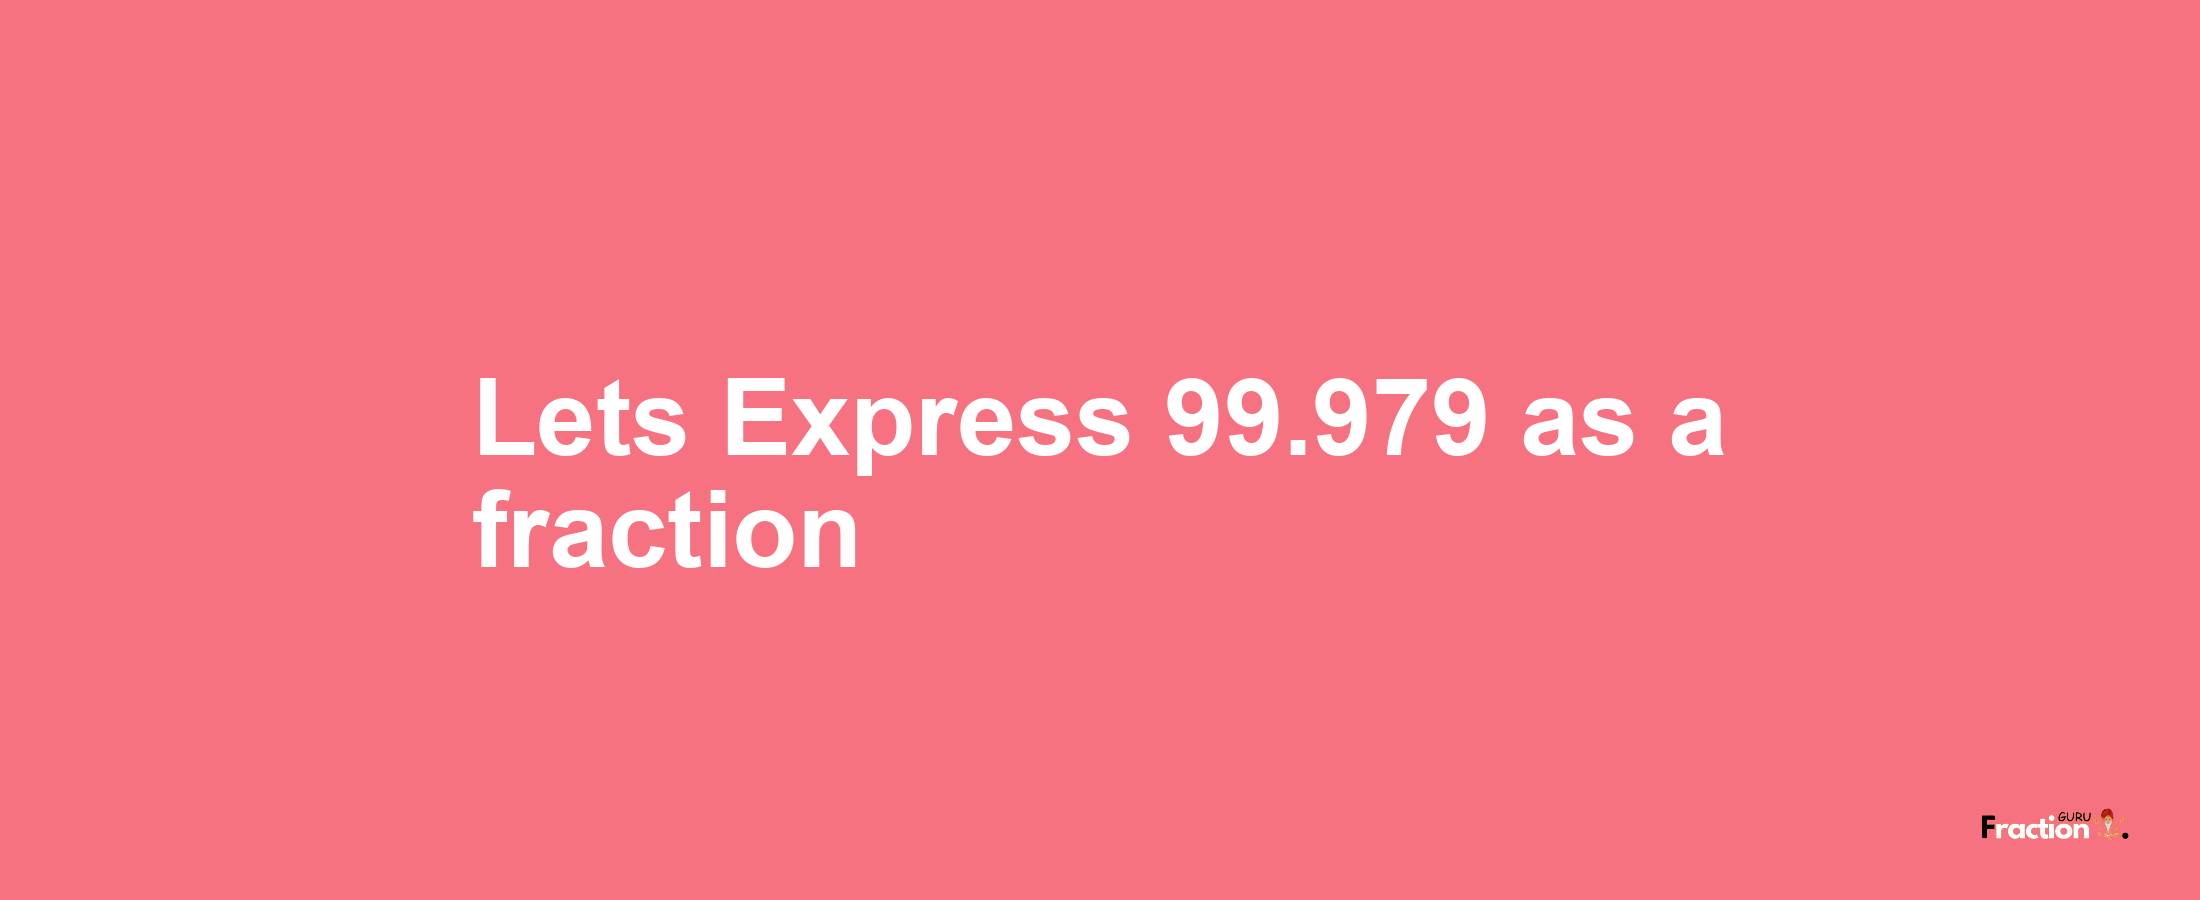 Lets Express 99.979 as afraction